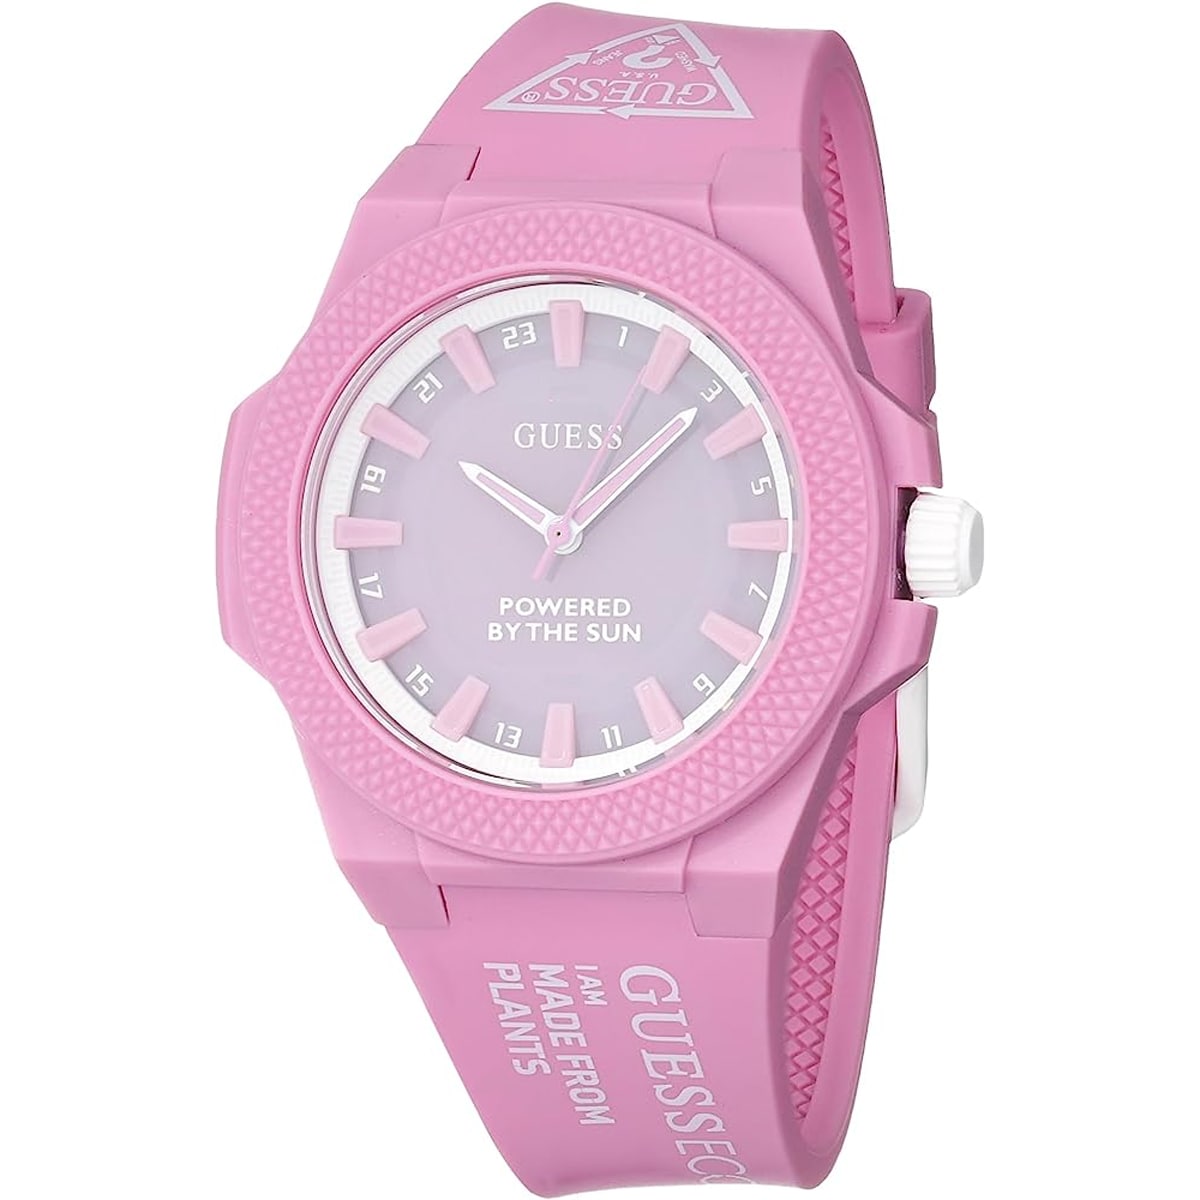 MONTRE GUESS OUTSPOKEN FEMME SILICONE